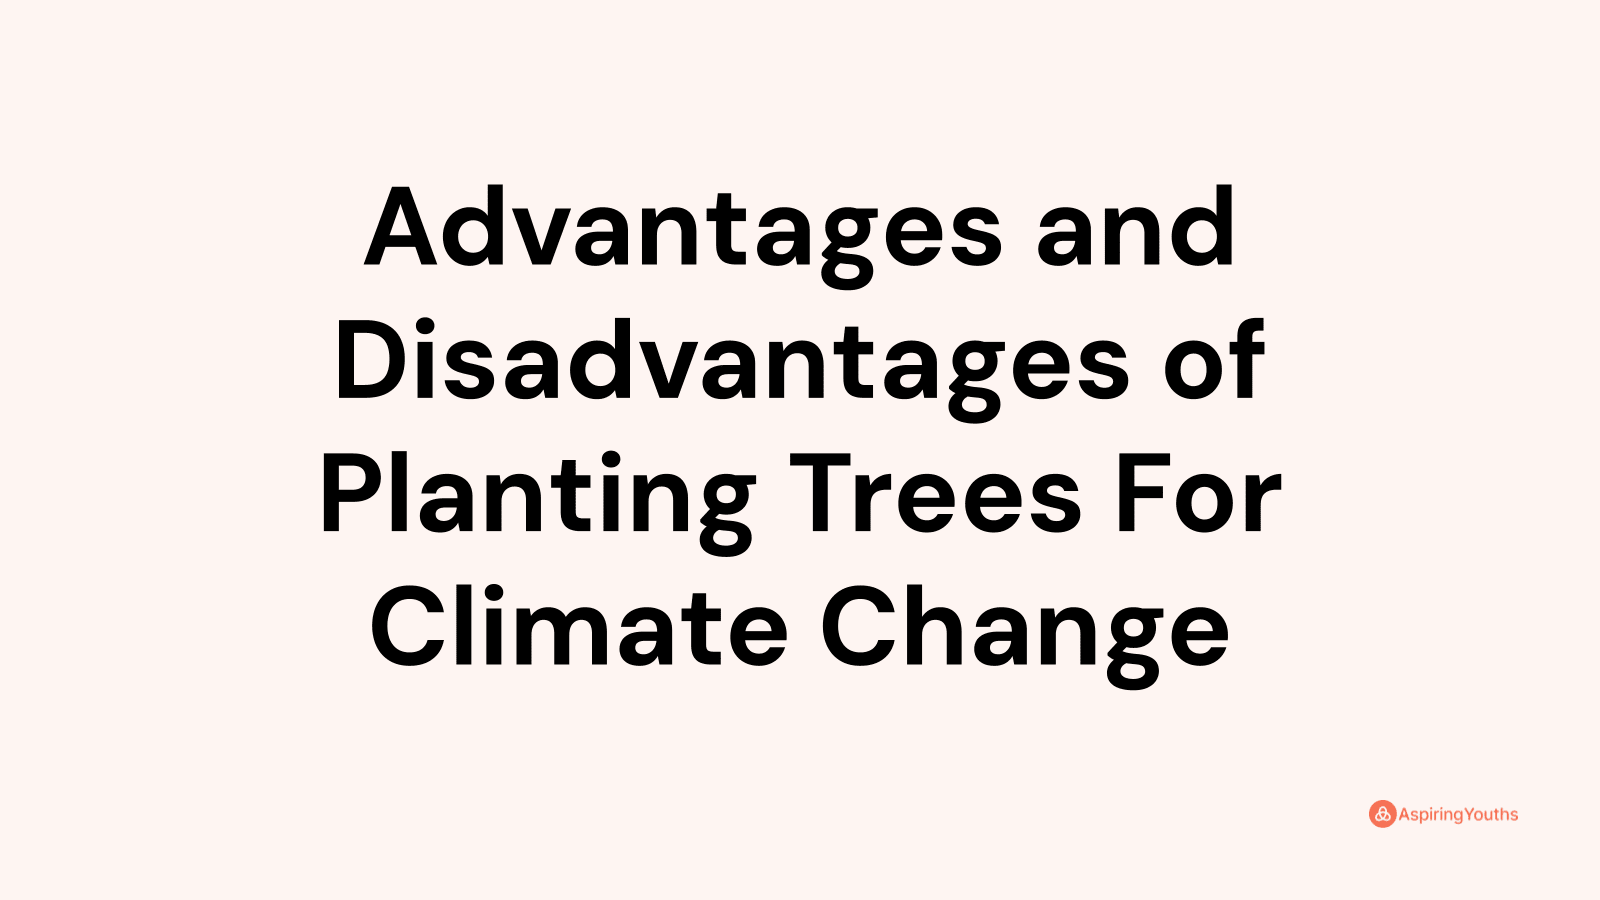 Advantages and disadvantages of Planting Trees For Climate Change